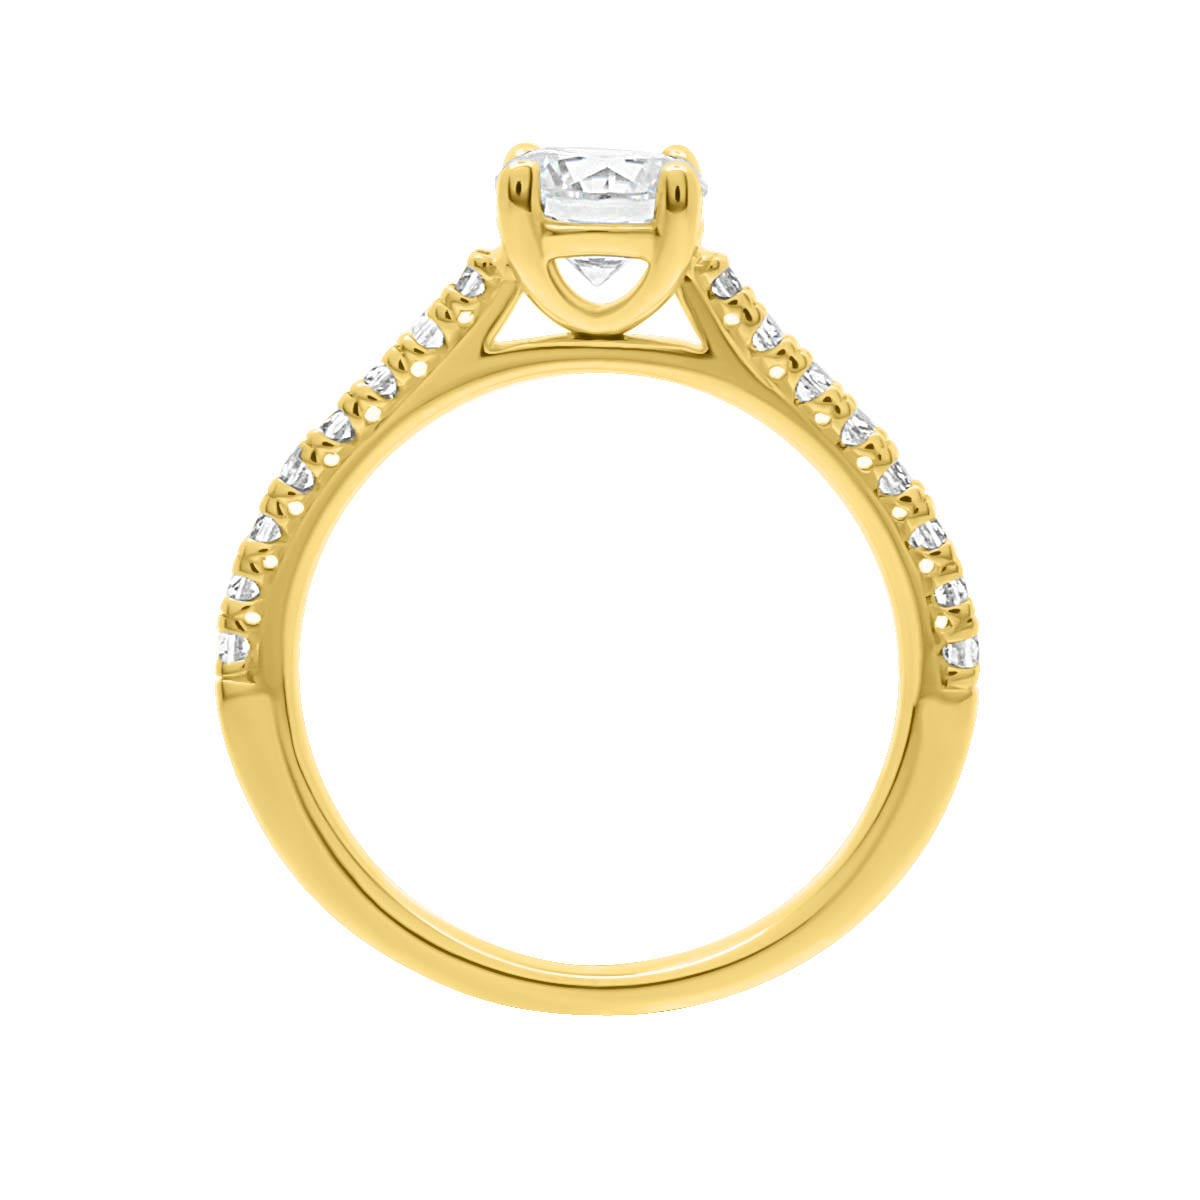 Castell Set Diamond Ring made from yellow gold pictured in a upright position